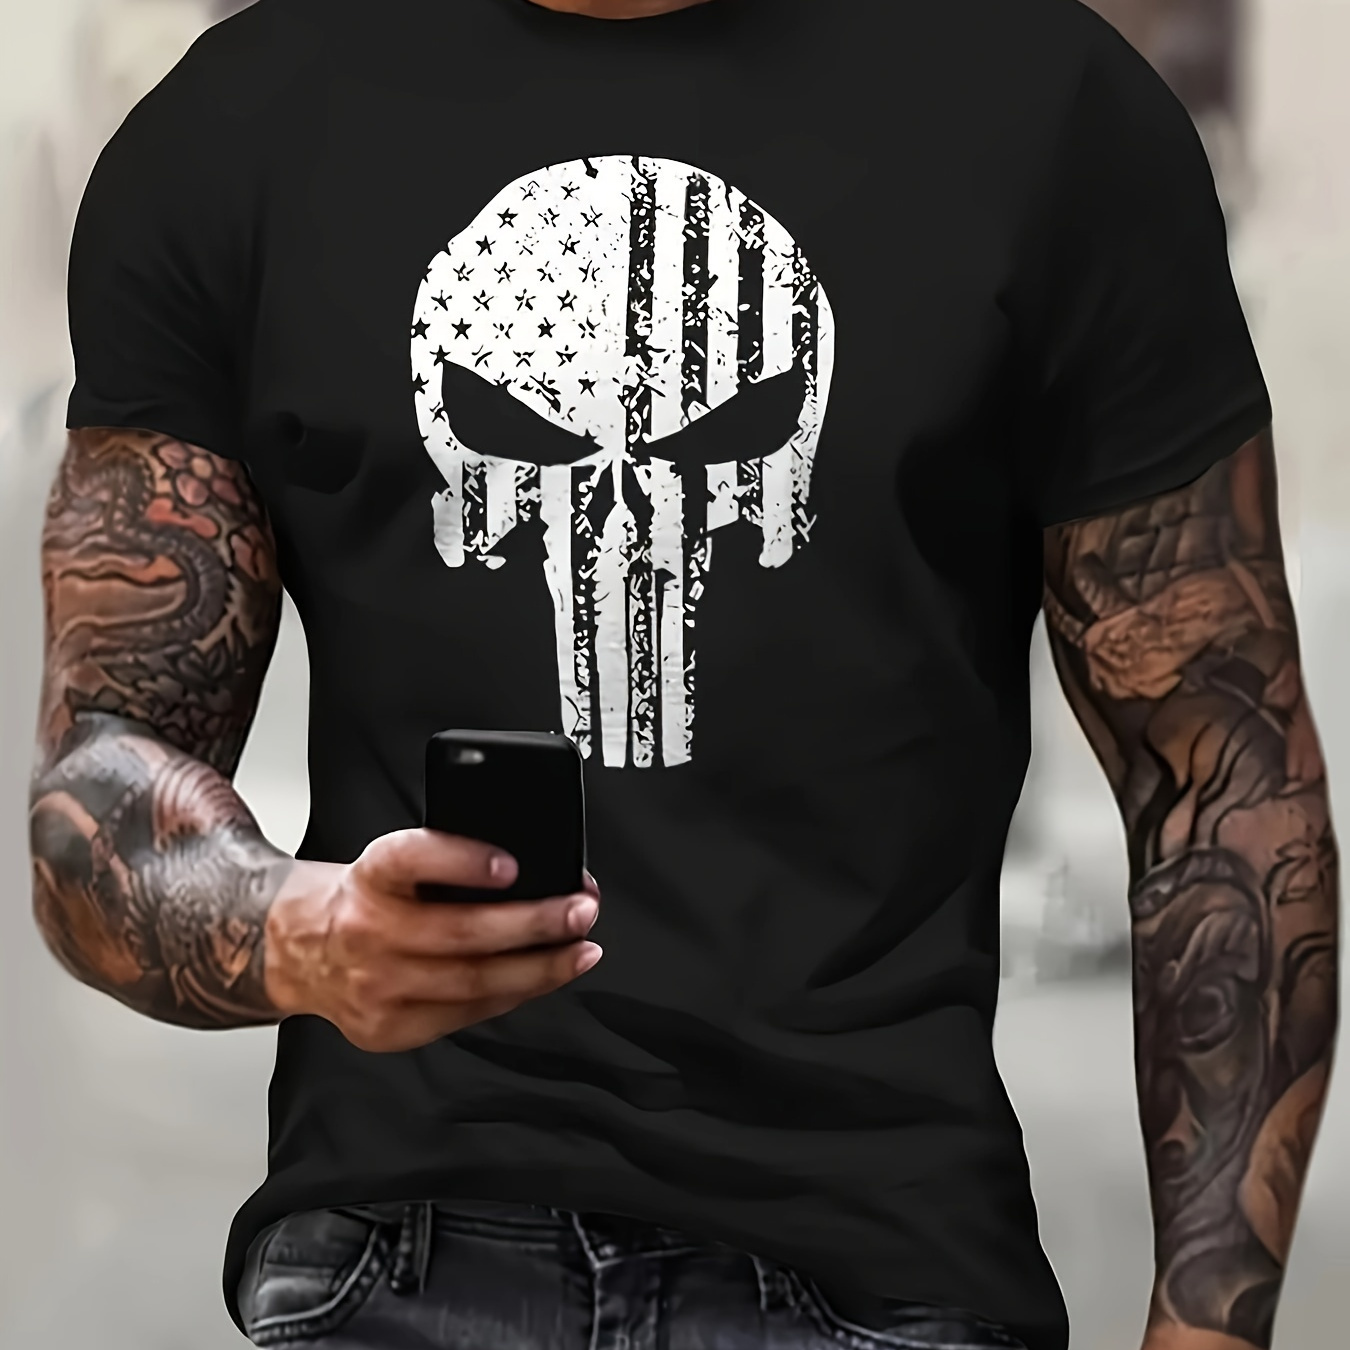 

Skull Pattern Printed T-shirt Men's Casual Style Summer And Autumn Slightly Elastic Round Neck T-shirt